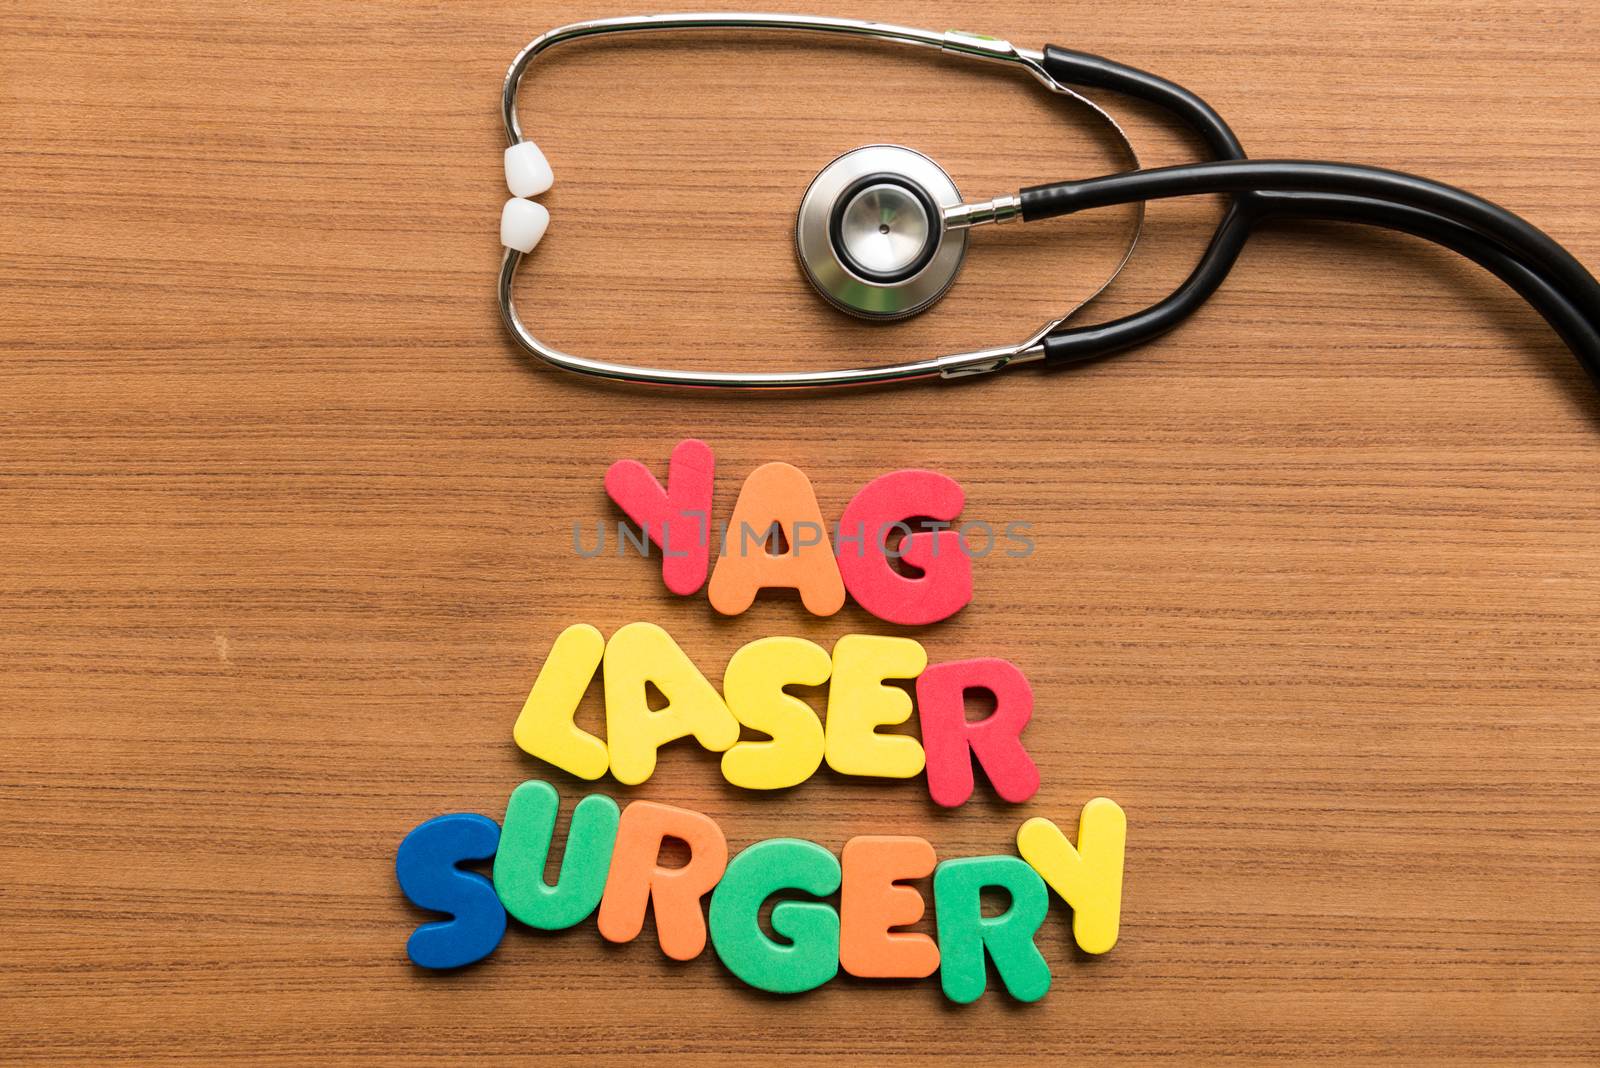 yag laser surgery colorful word with stethoscope on wooden background